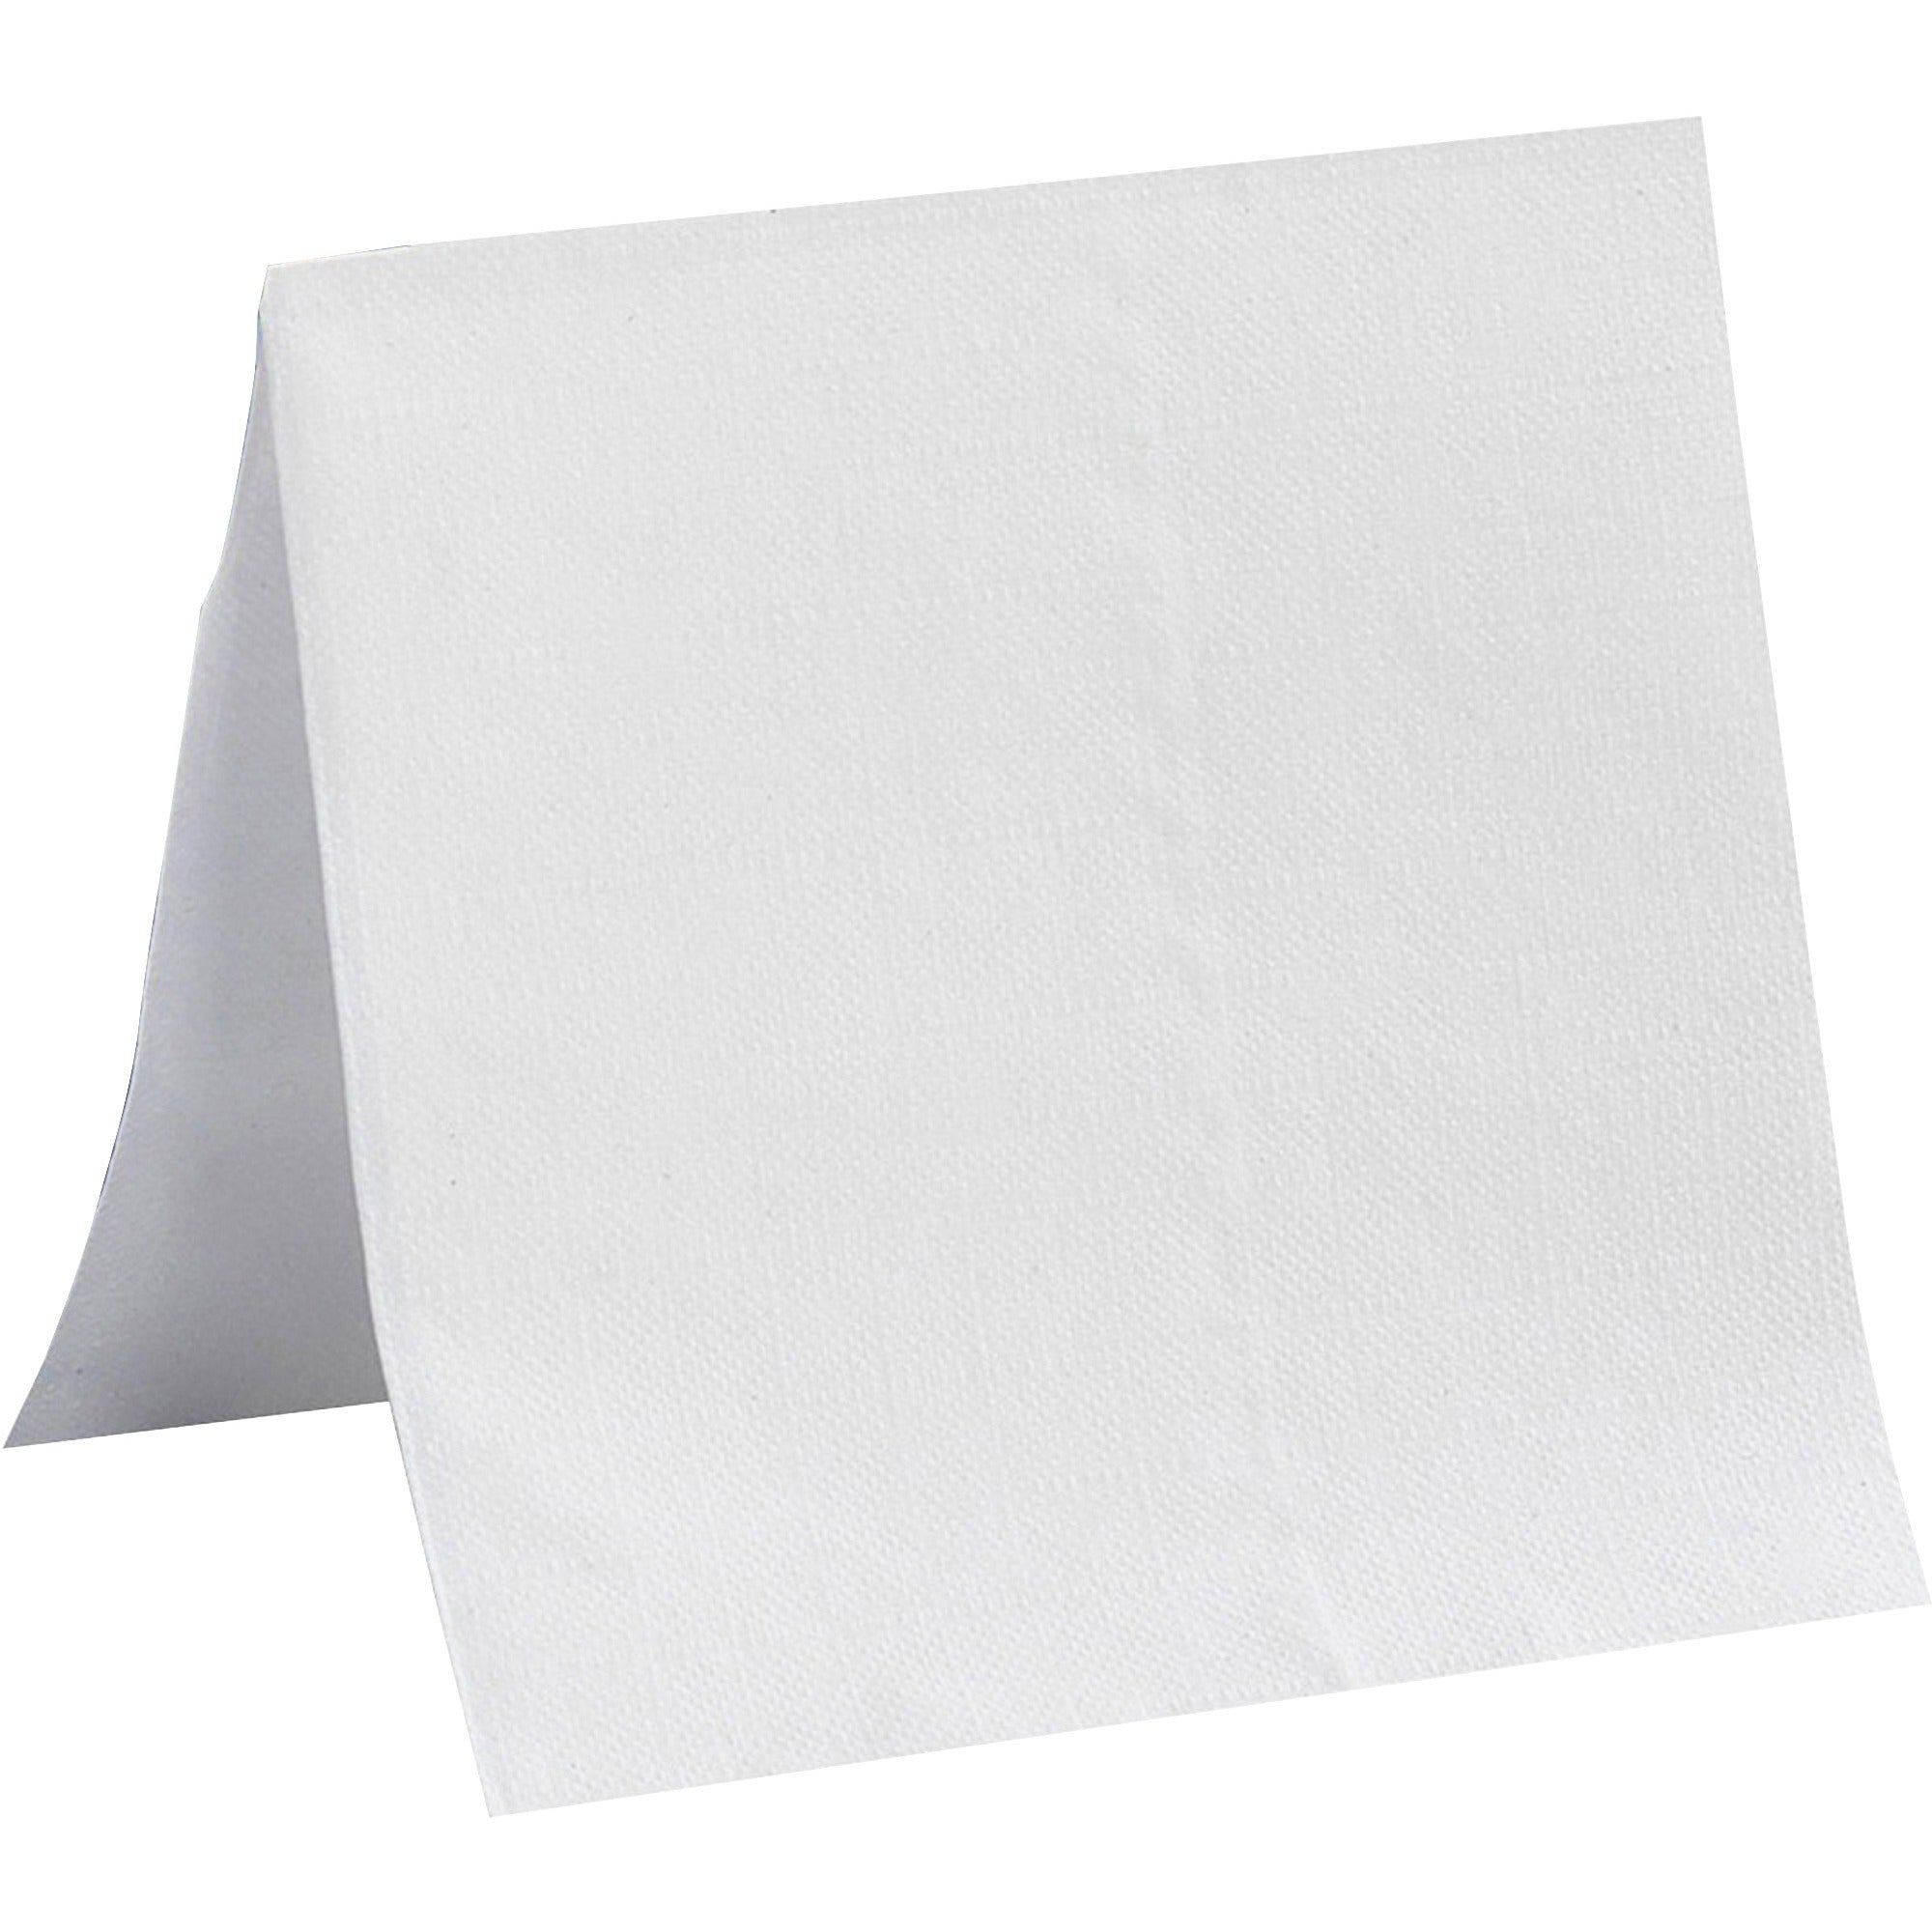 dixie-1-4-fold-beverage-napkin-1-ply-950-x-950-white-paper-soft-absorbent-for-beverage-restaurant-500-per-pack-8-carton_gpc96019ct - 2